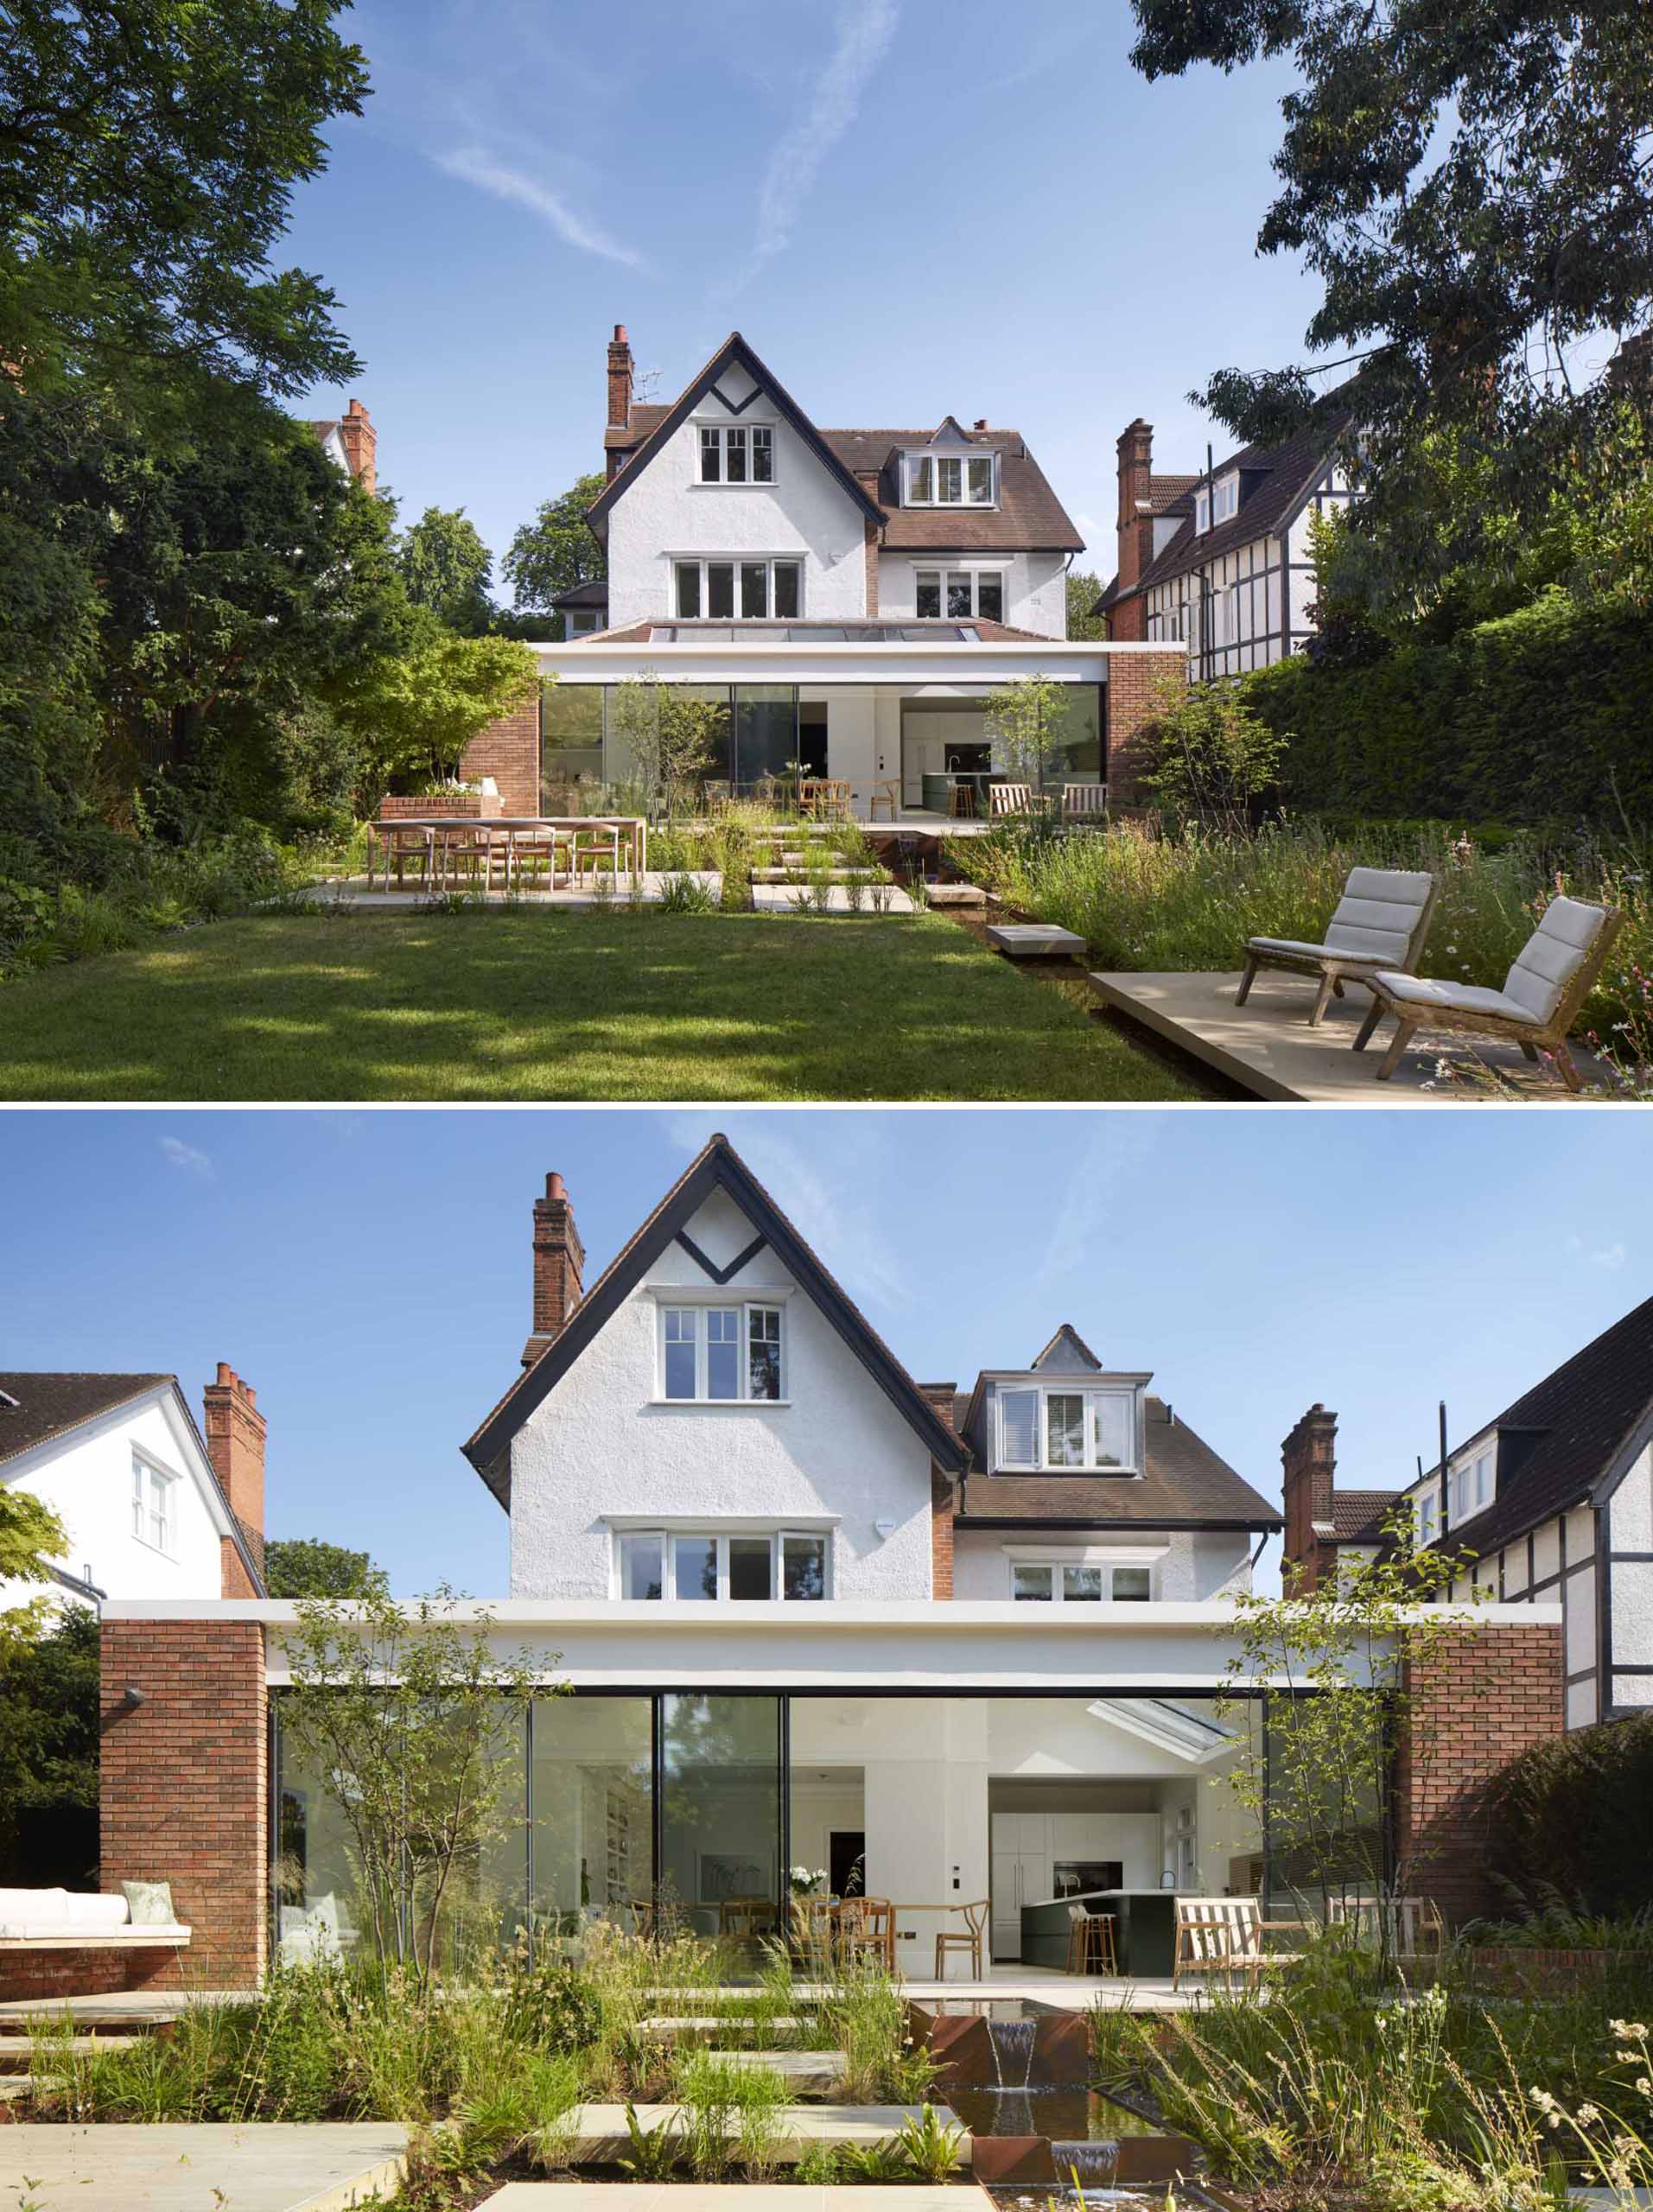 An updated brick extension for an Edwardian home.